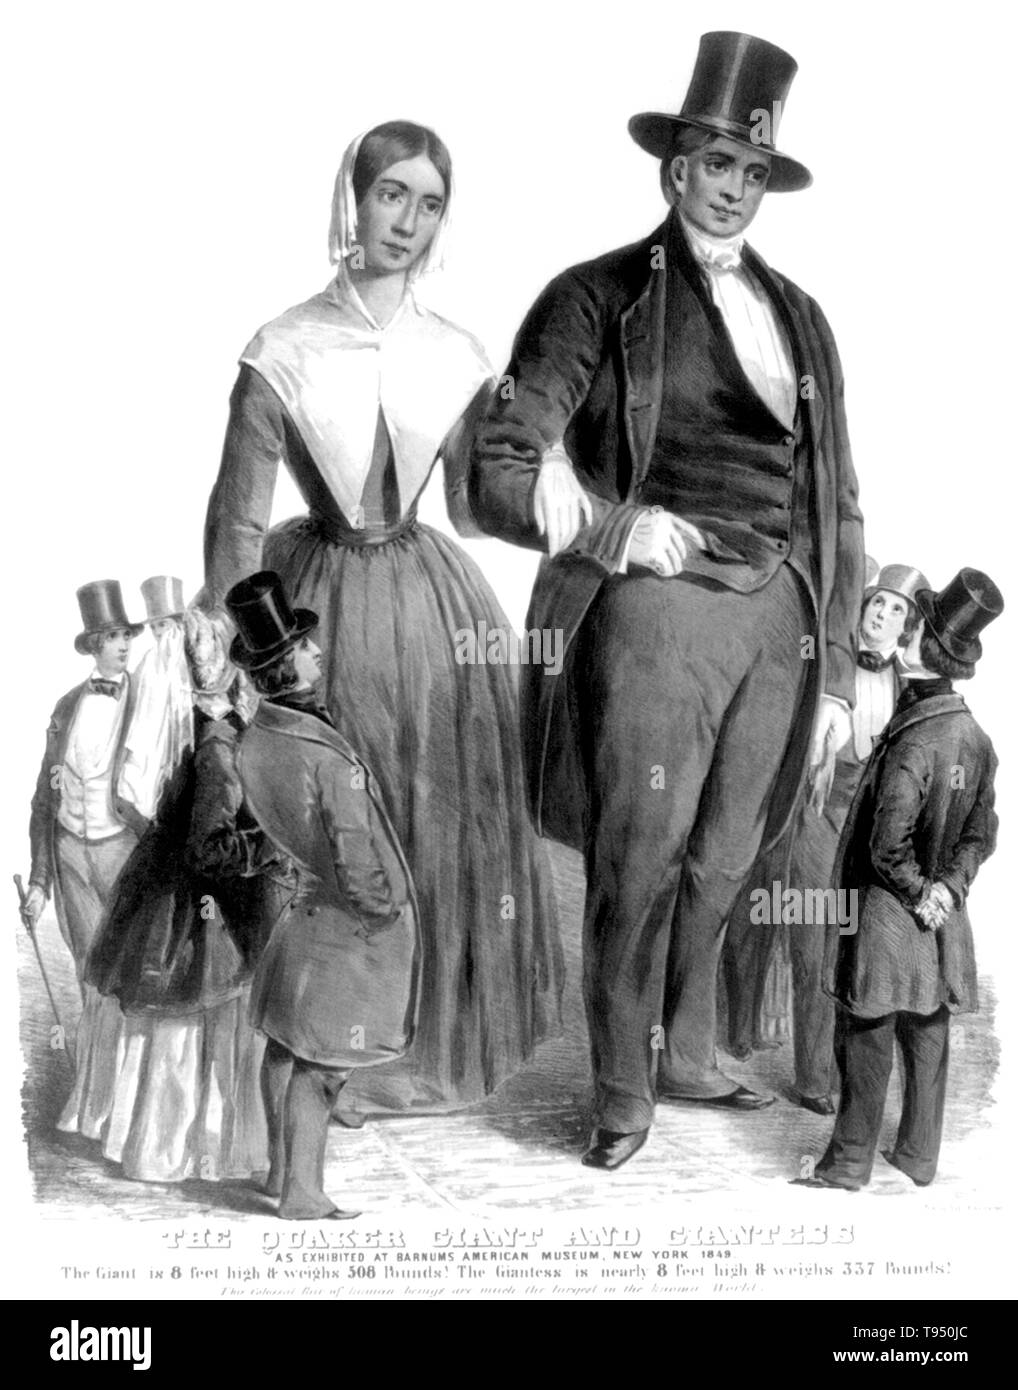 Entitled: 'The Quaker giant and giantess. As exhibited at Barnum's American museum.' Robert Hales (May 2, 1820 - 1863) was an English sideshow performer know as The Norfolk Giant. He grew to a height of 7 feet 8 inches, was said to be over 450 pounds with a chest measurment of 64 inches. At the age of 13 he joined the navy, but when he was 17 years old he became to big. Hales started to exhibit himself at fairs and shows throughout the country. Stock Photo